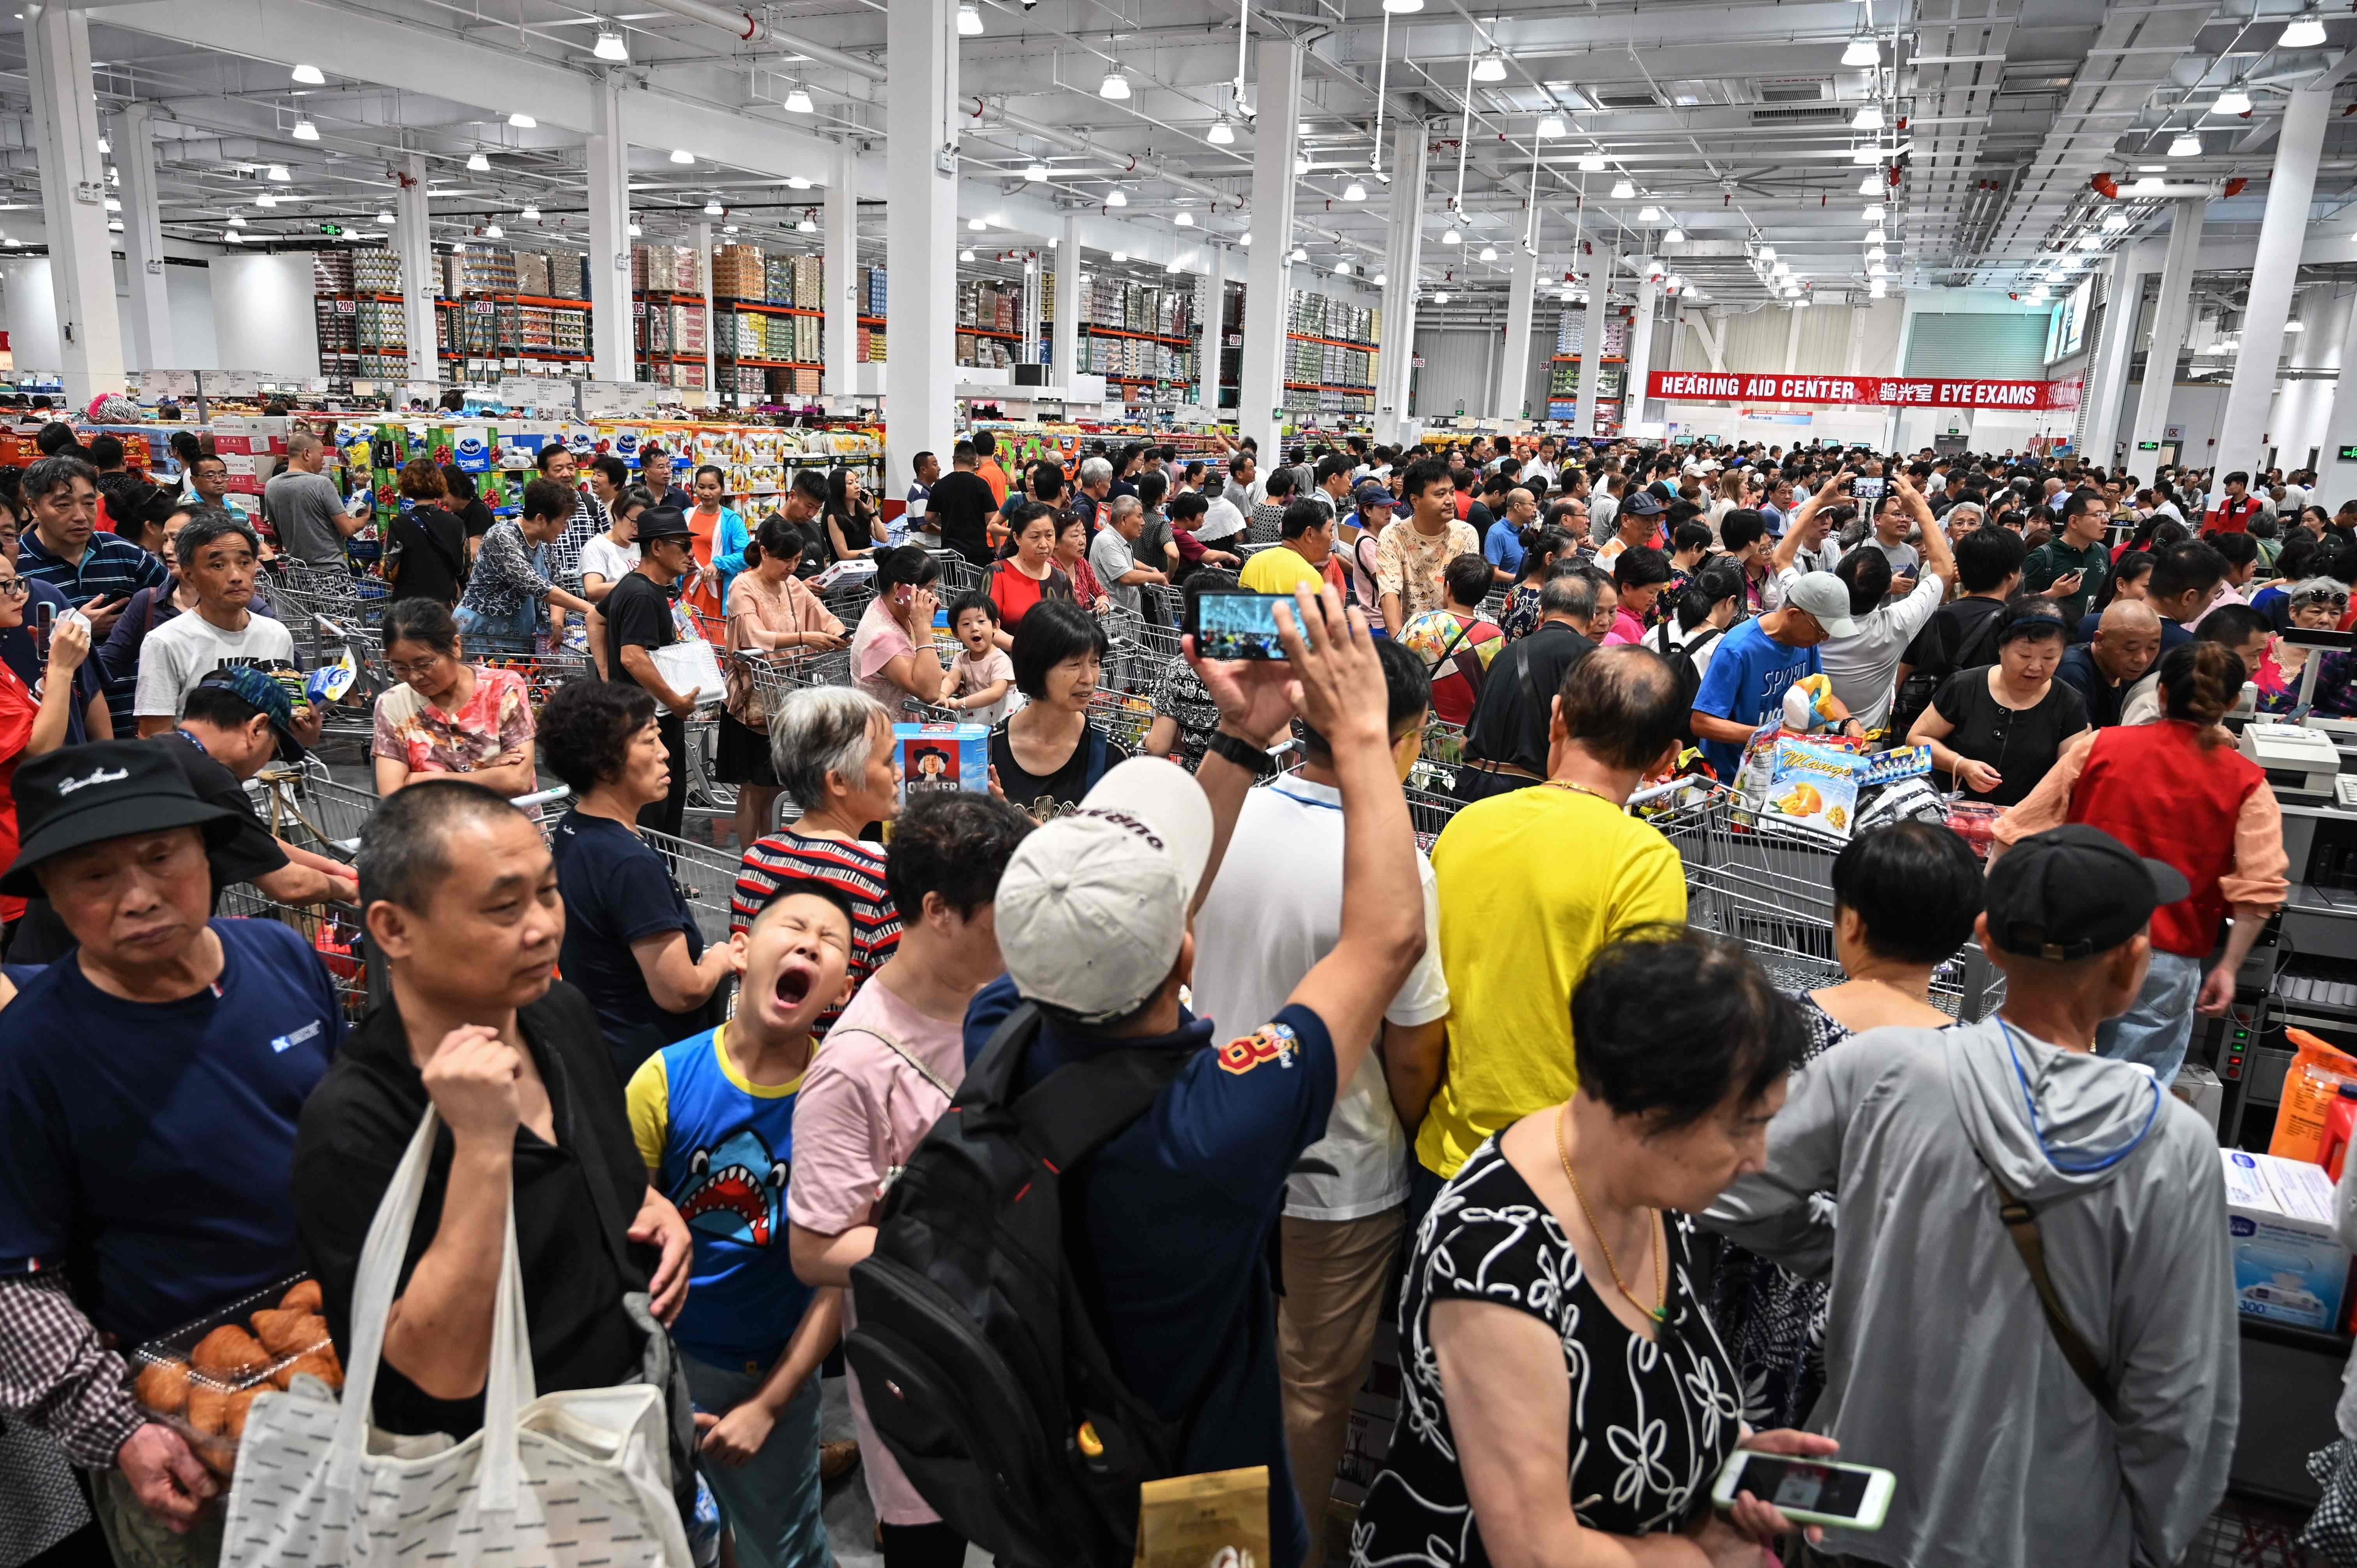 Birkin bags, Moutai and a savvy social media push: how Costco scored with  its Shanghai debut while other retailers failed